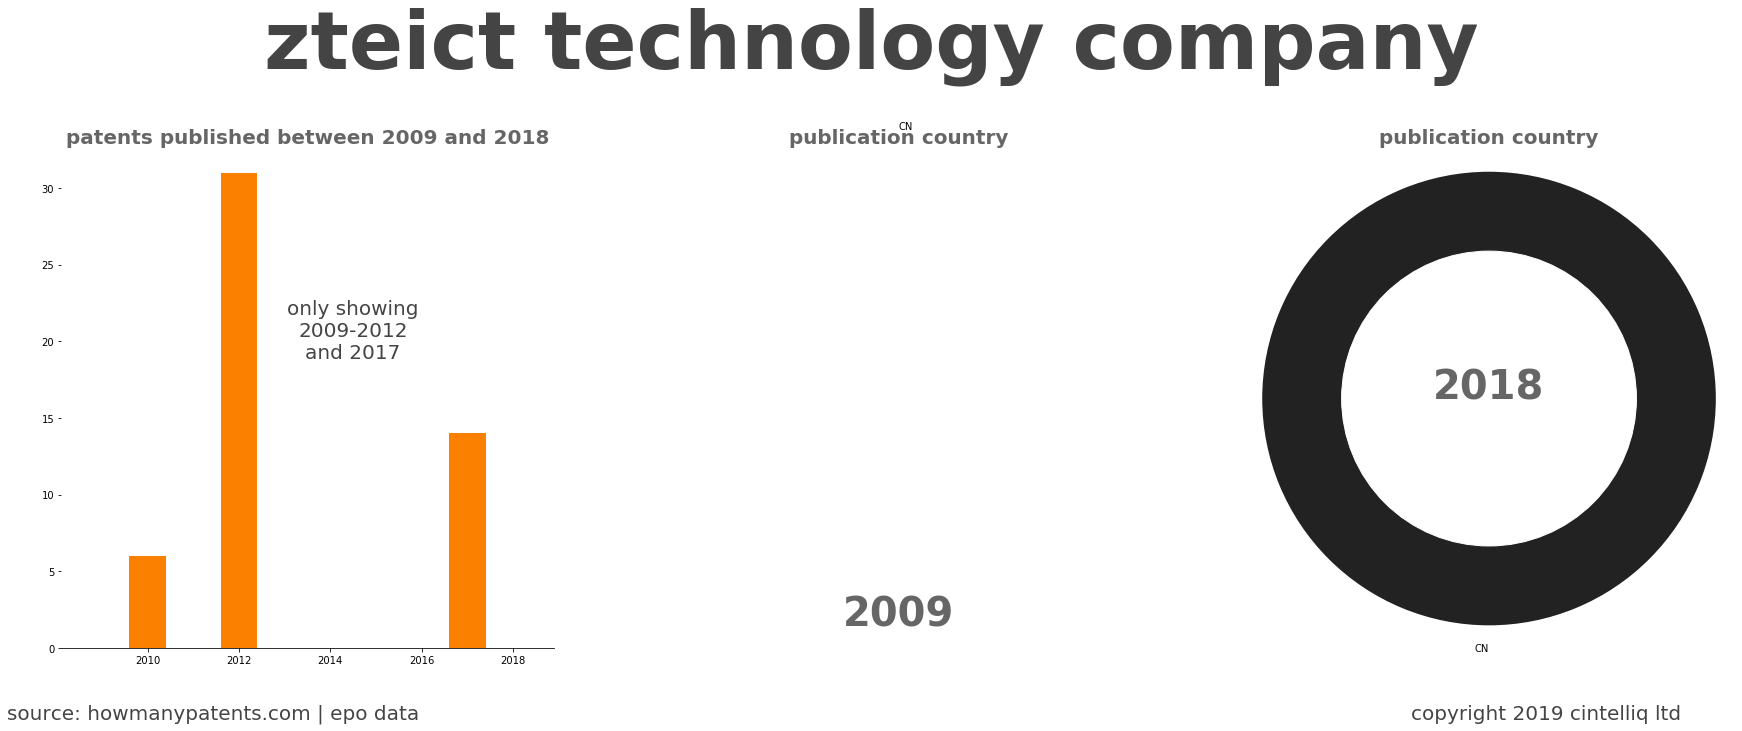 summary of patents for Zteict Technology Company